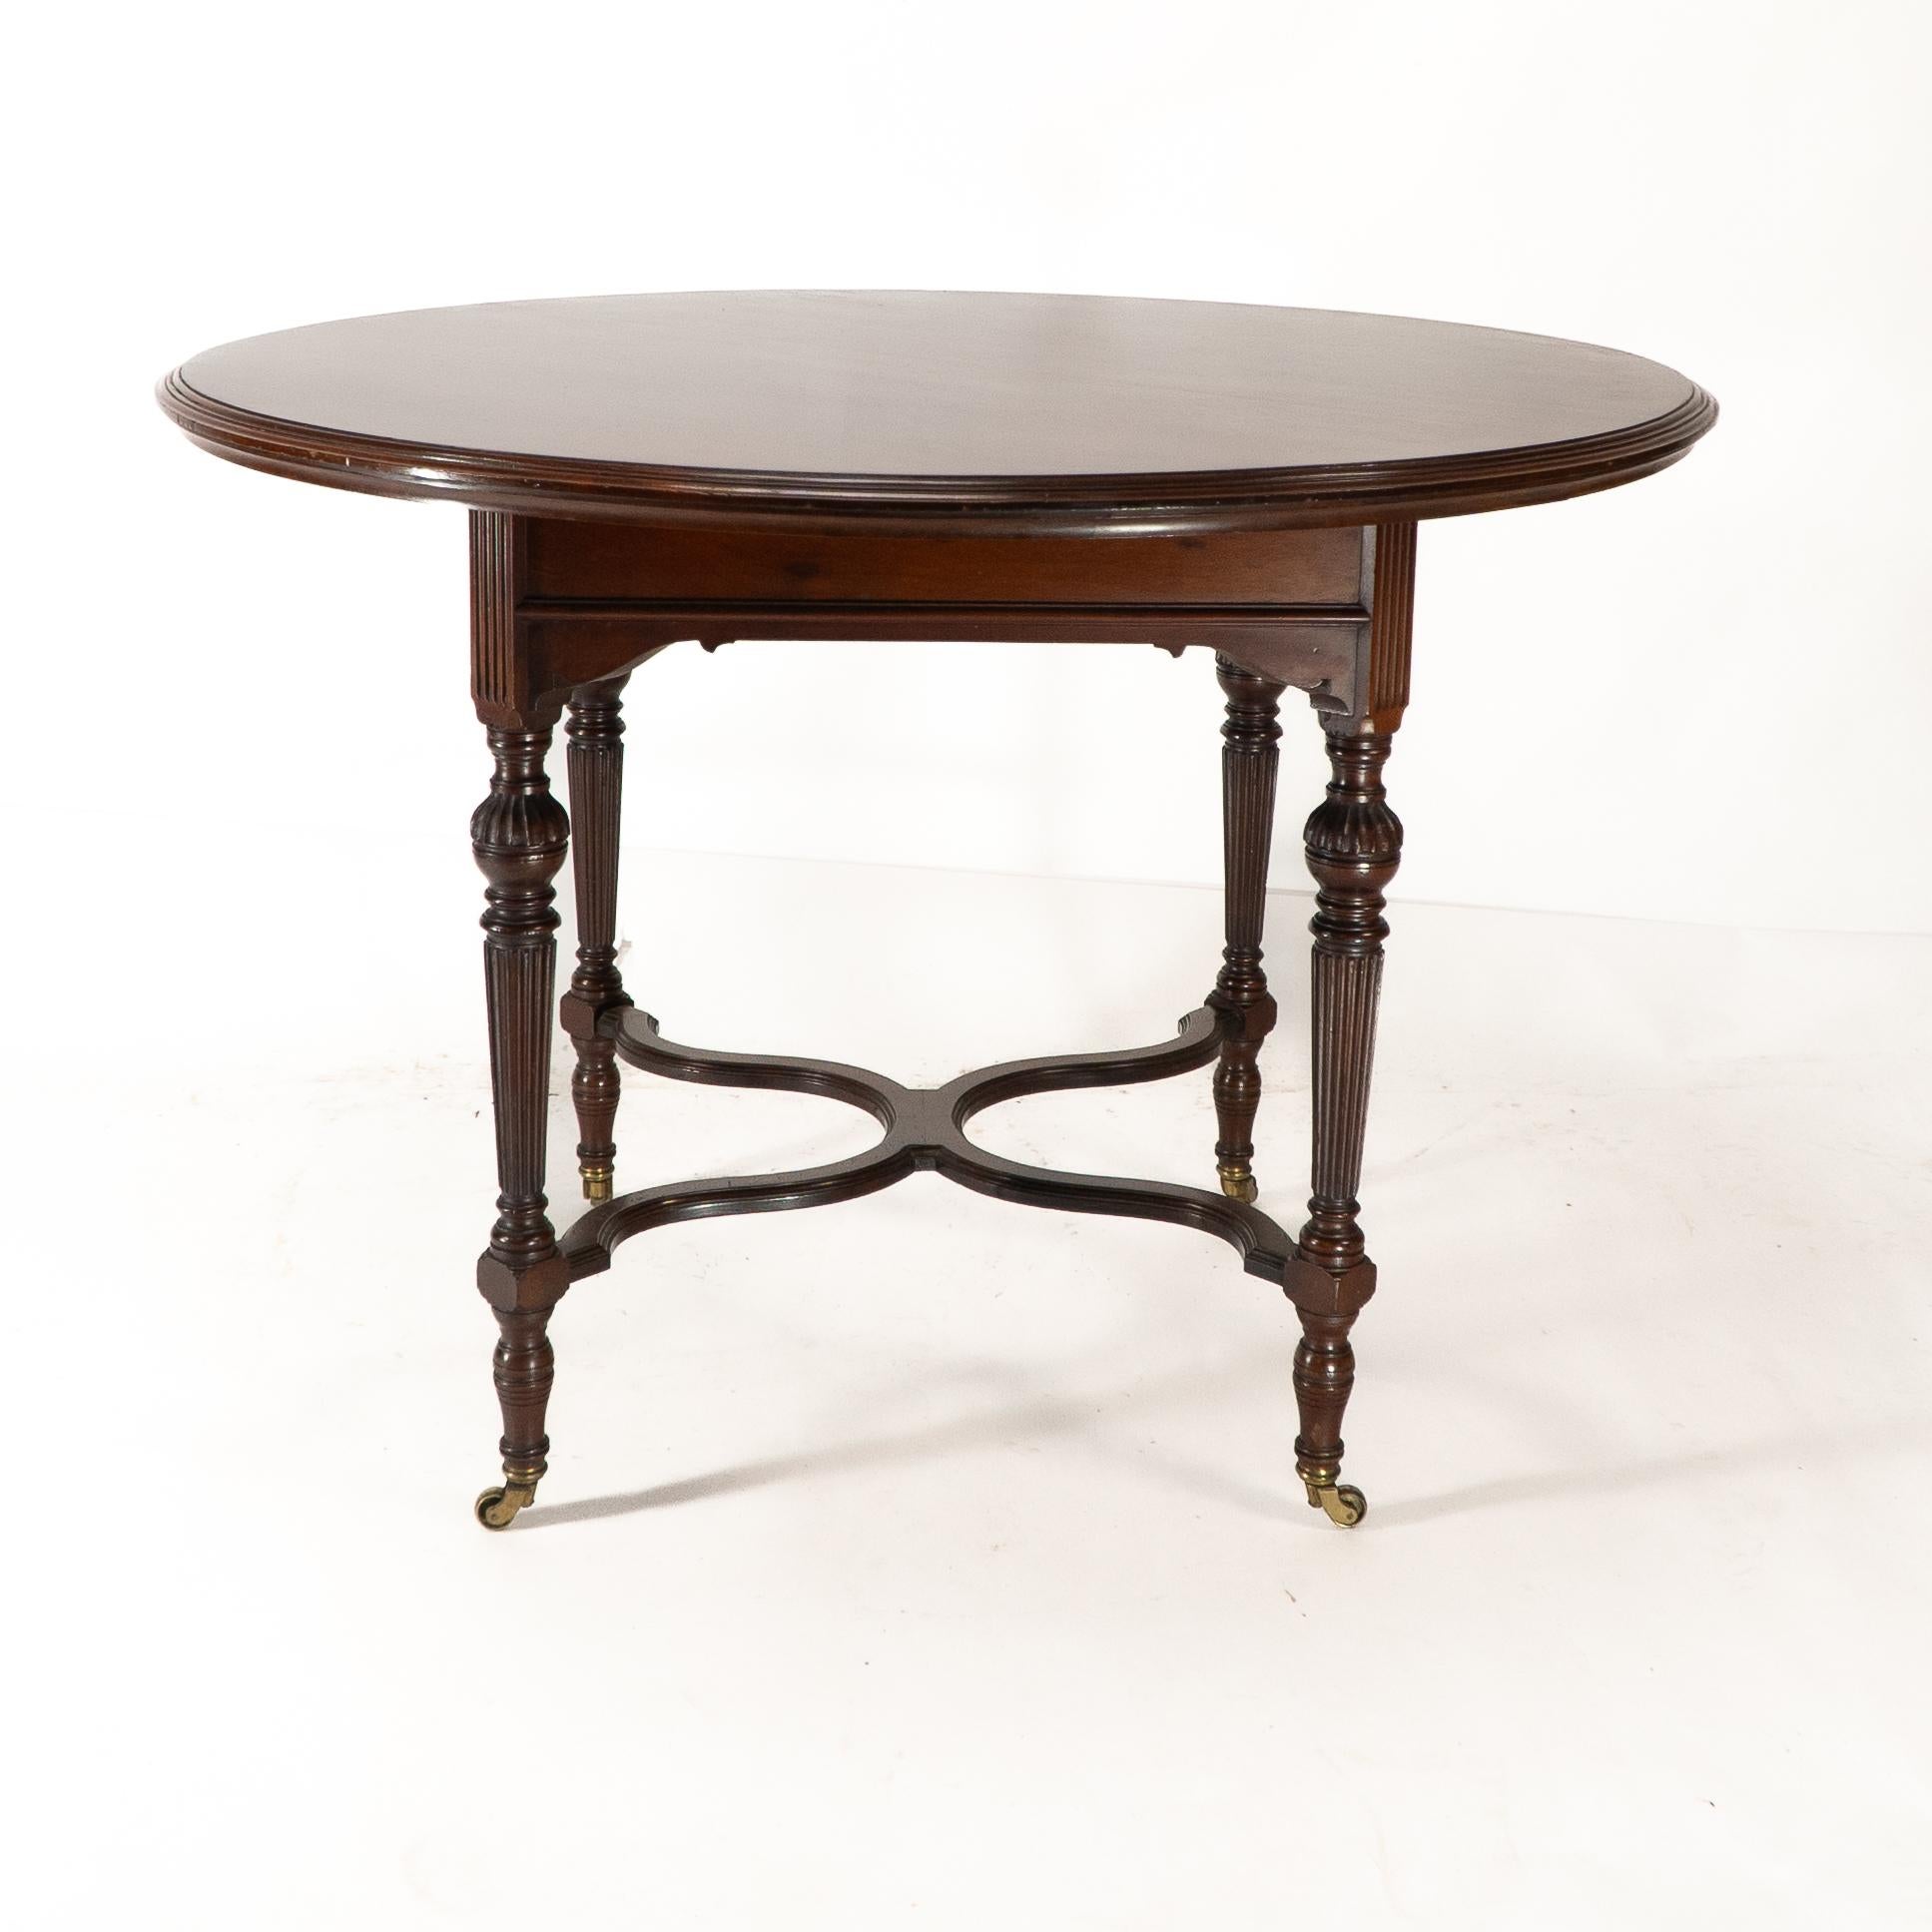 English Collinson & Lock attributed. An Aesthetic Movement walnut circular center table For Sale